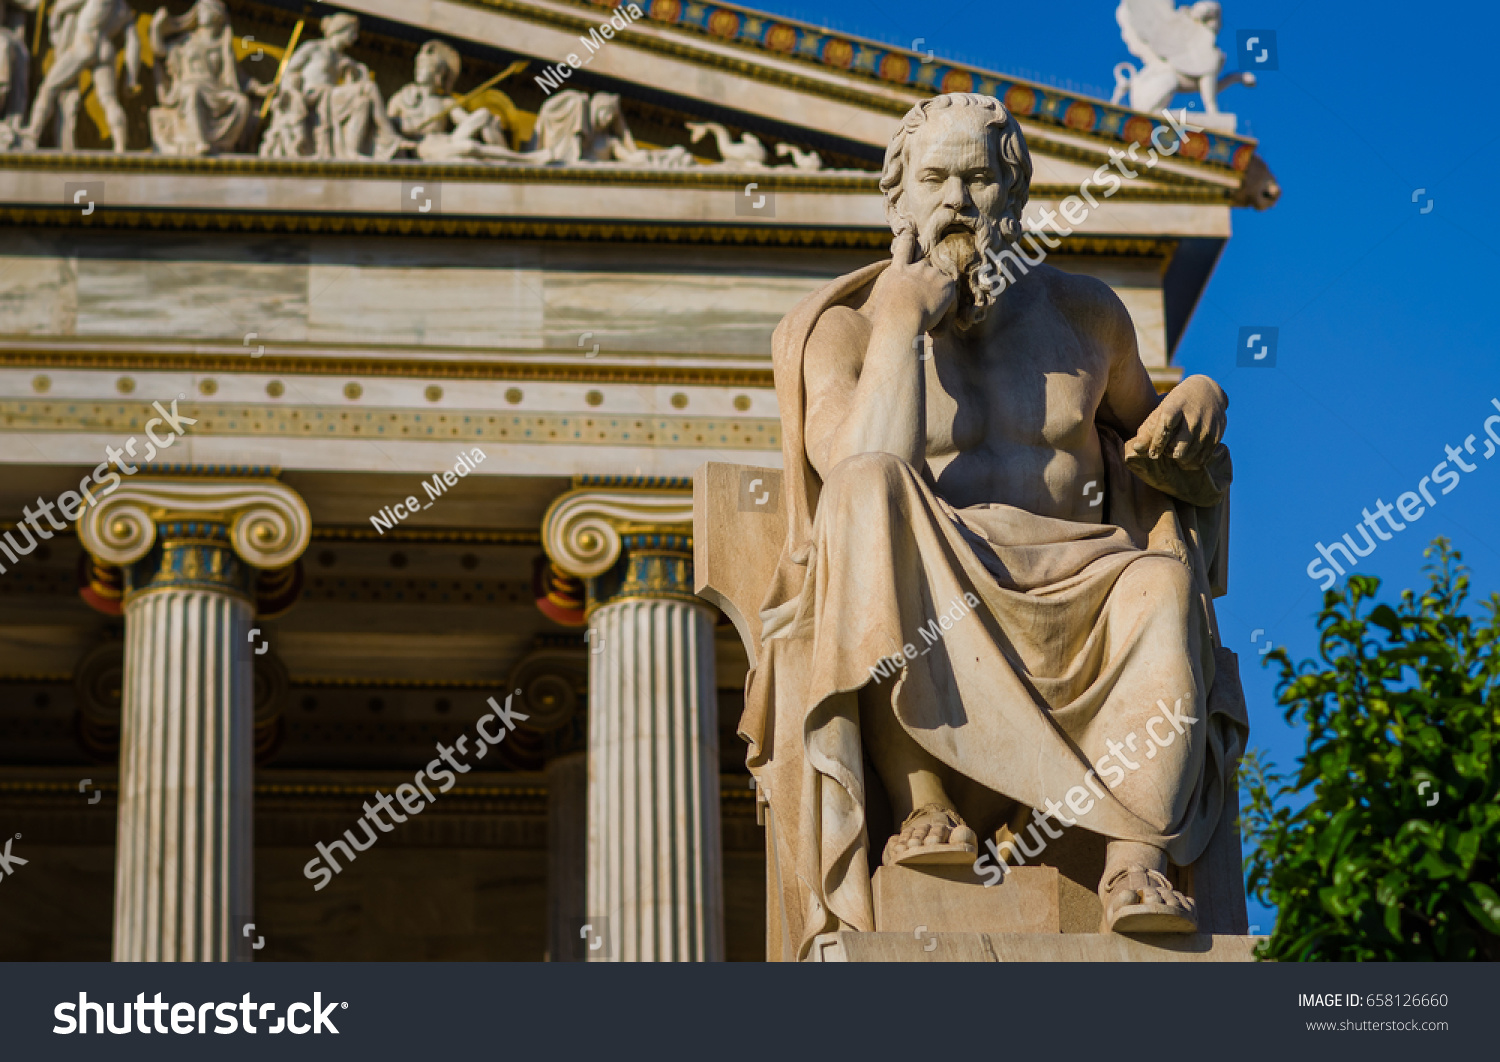 Close-up statue of the Greek philosopher Socrates on the background of classical columns #658126660